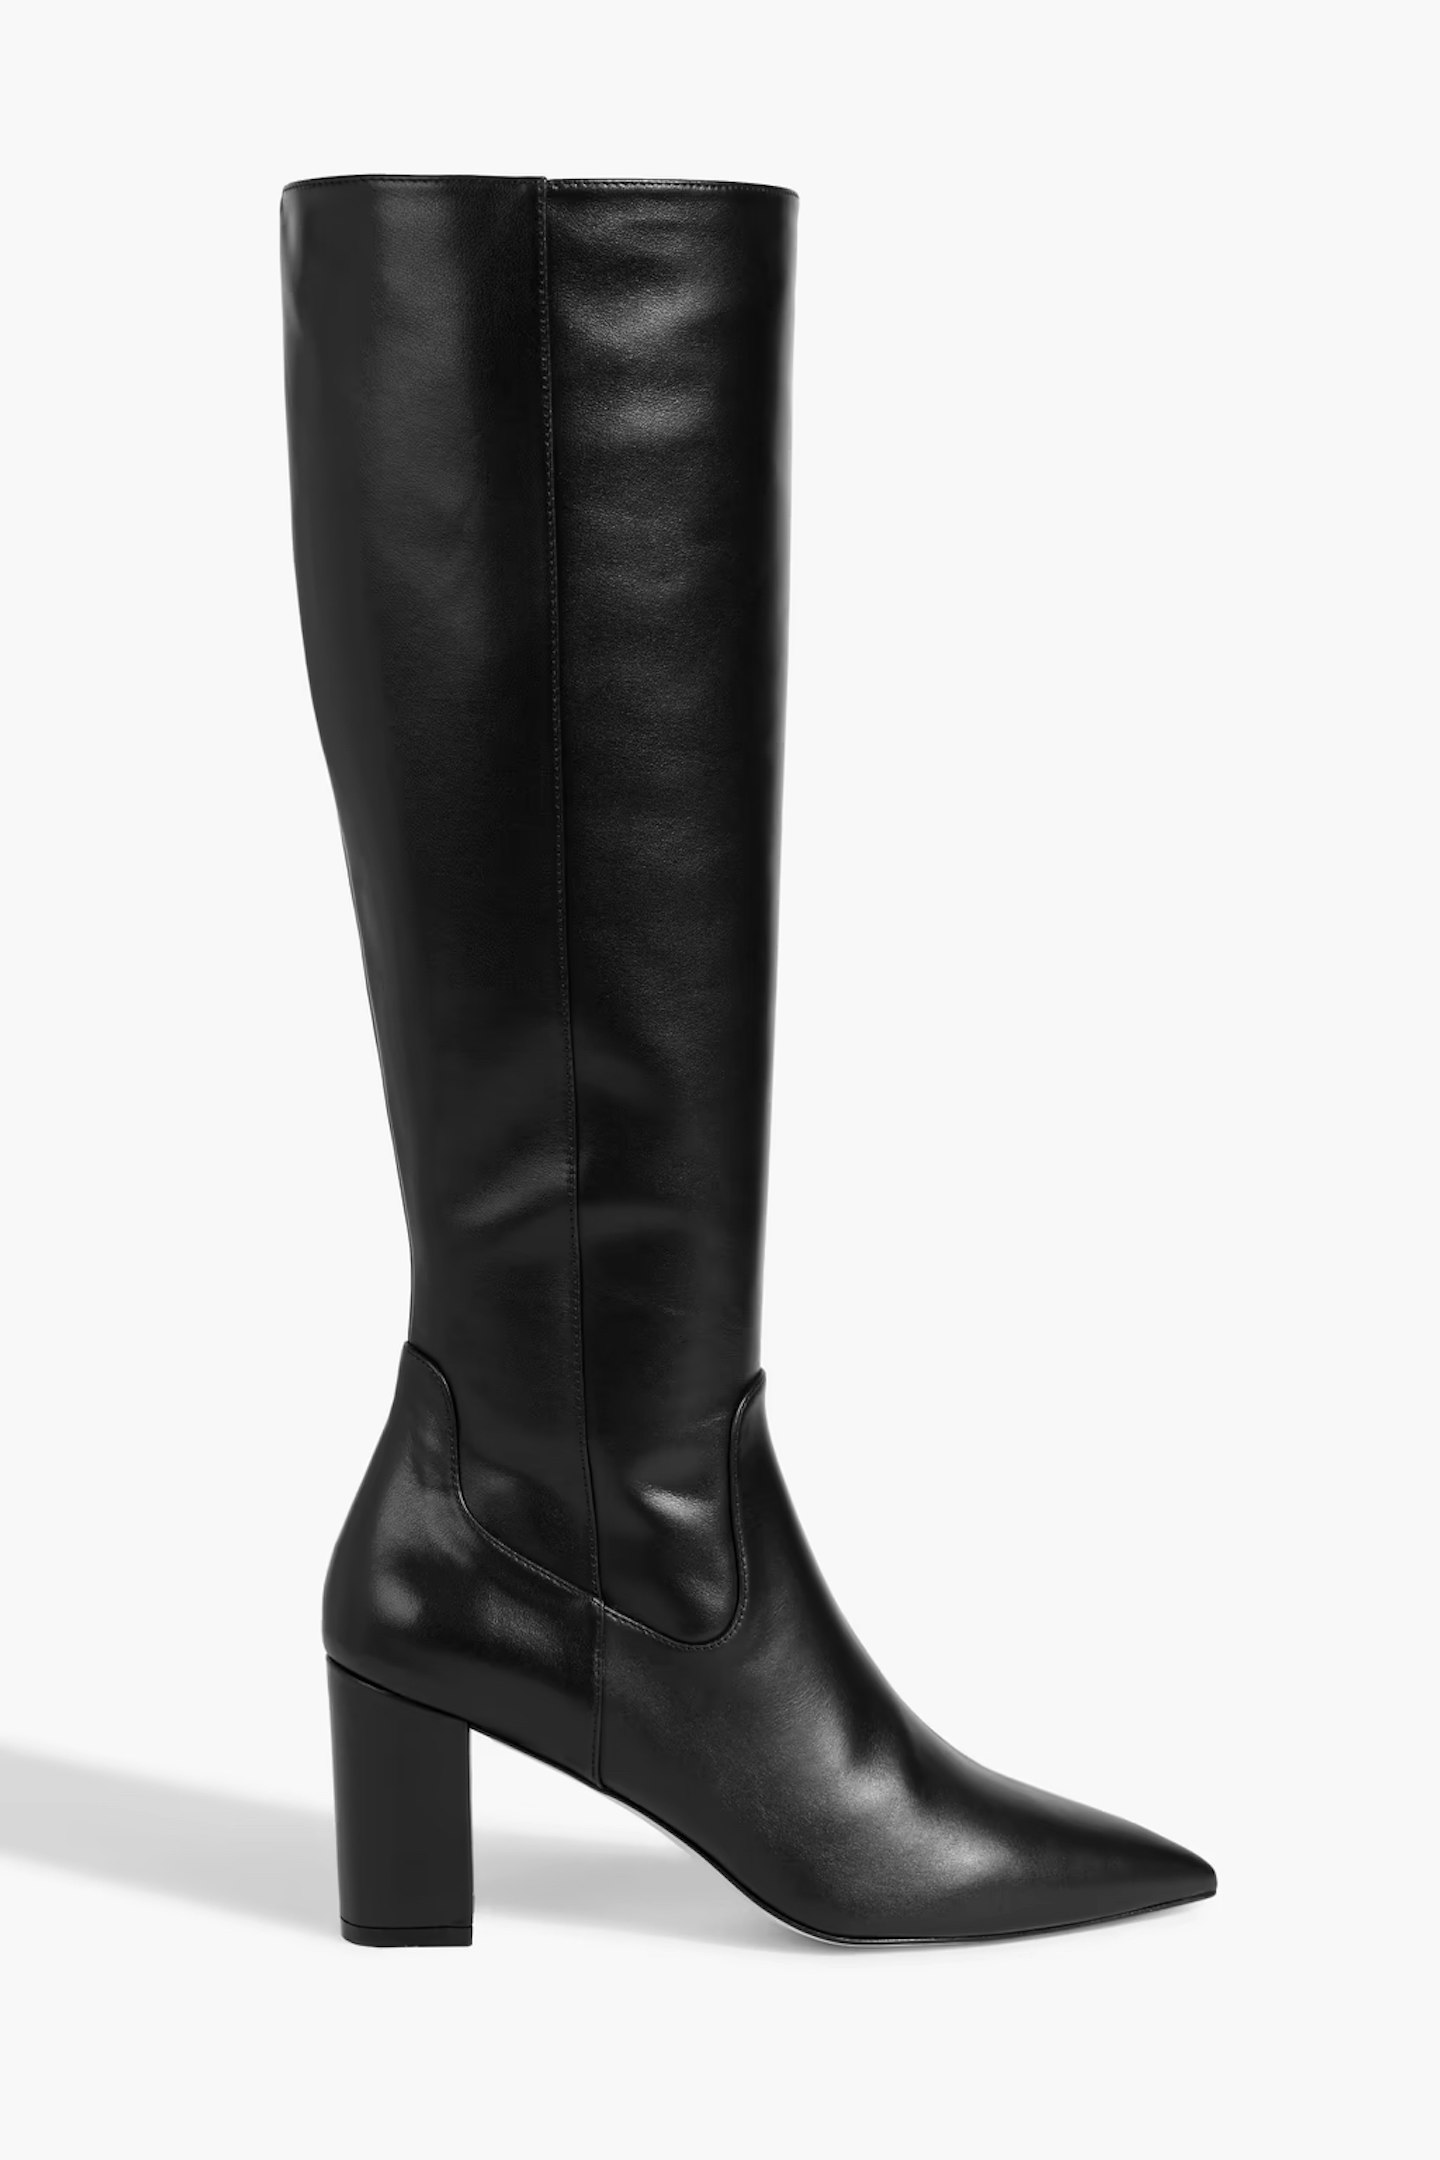 How to Style Knee High Boots, Platform Boots Outfit